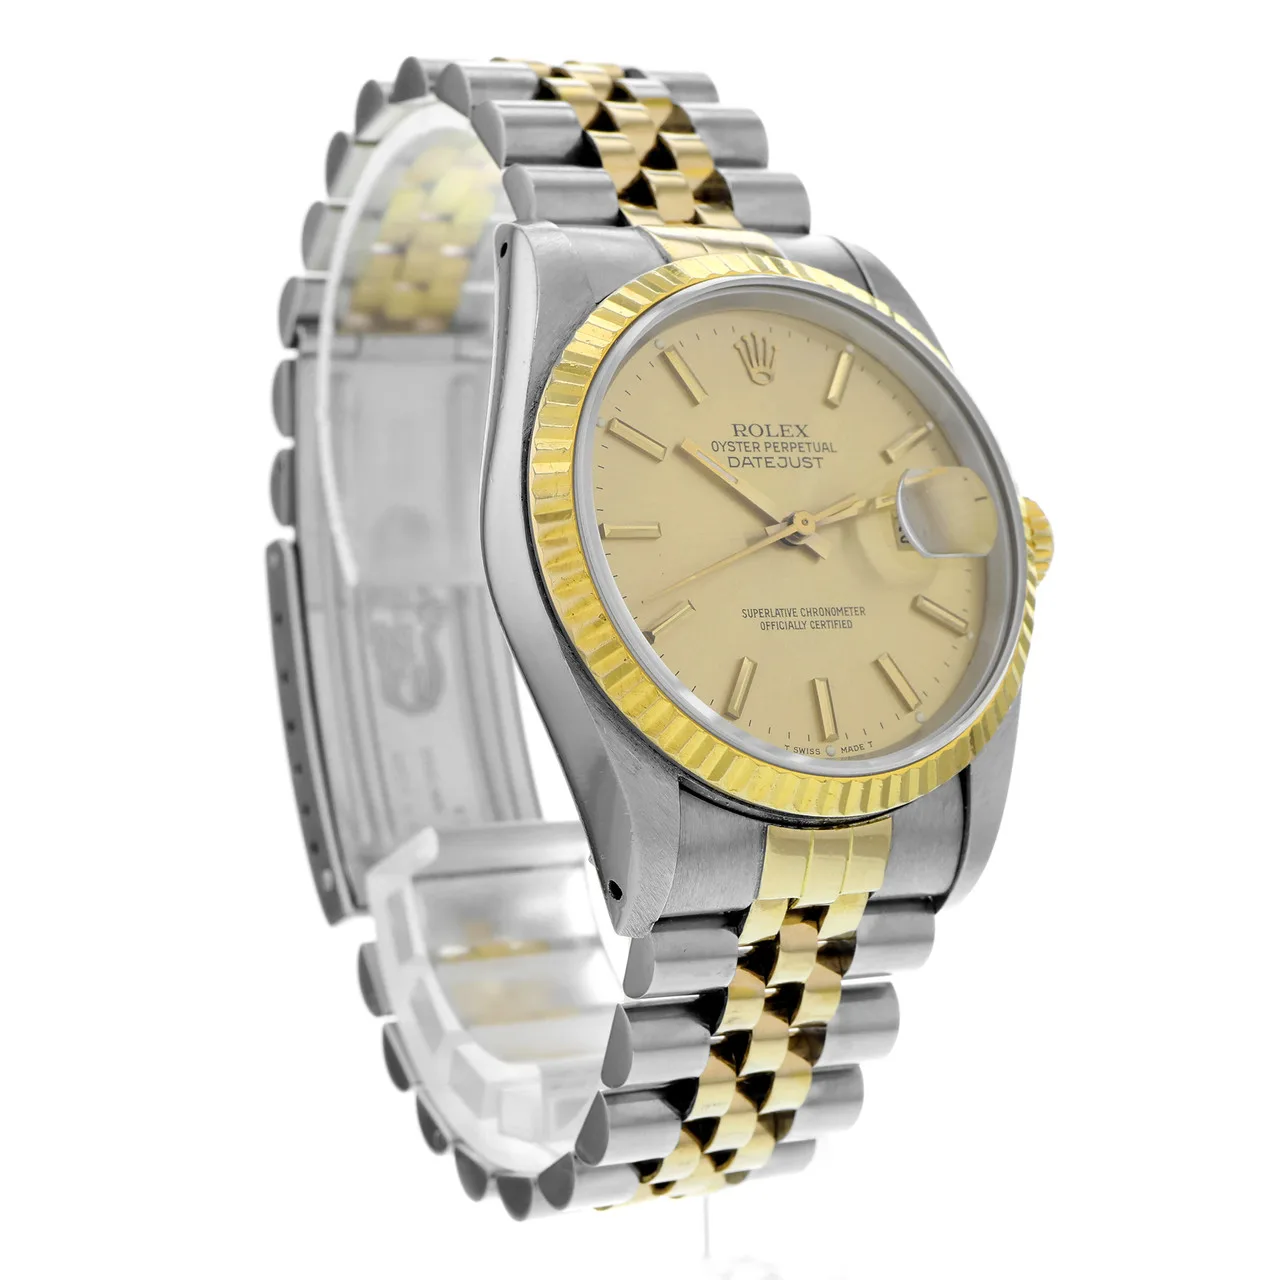 1989 Rolex Datejust 36 Two-Tone / Fluted / Champagne / Jubilee 16233 Listing Image 3